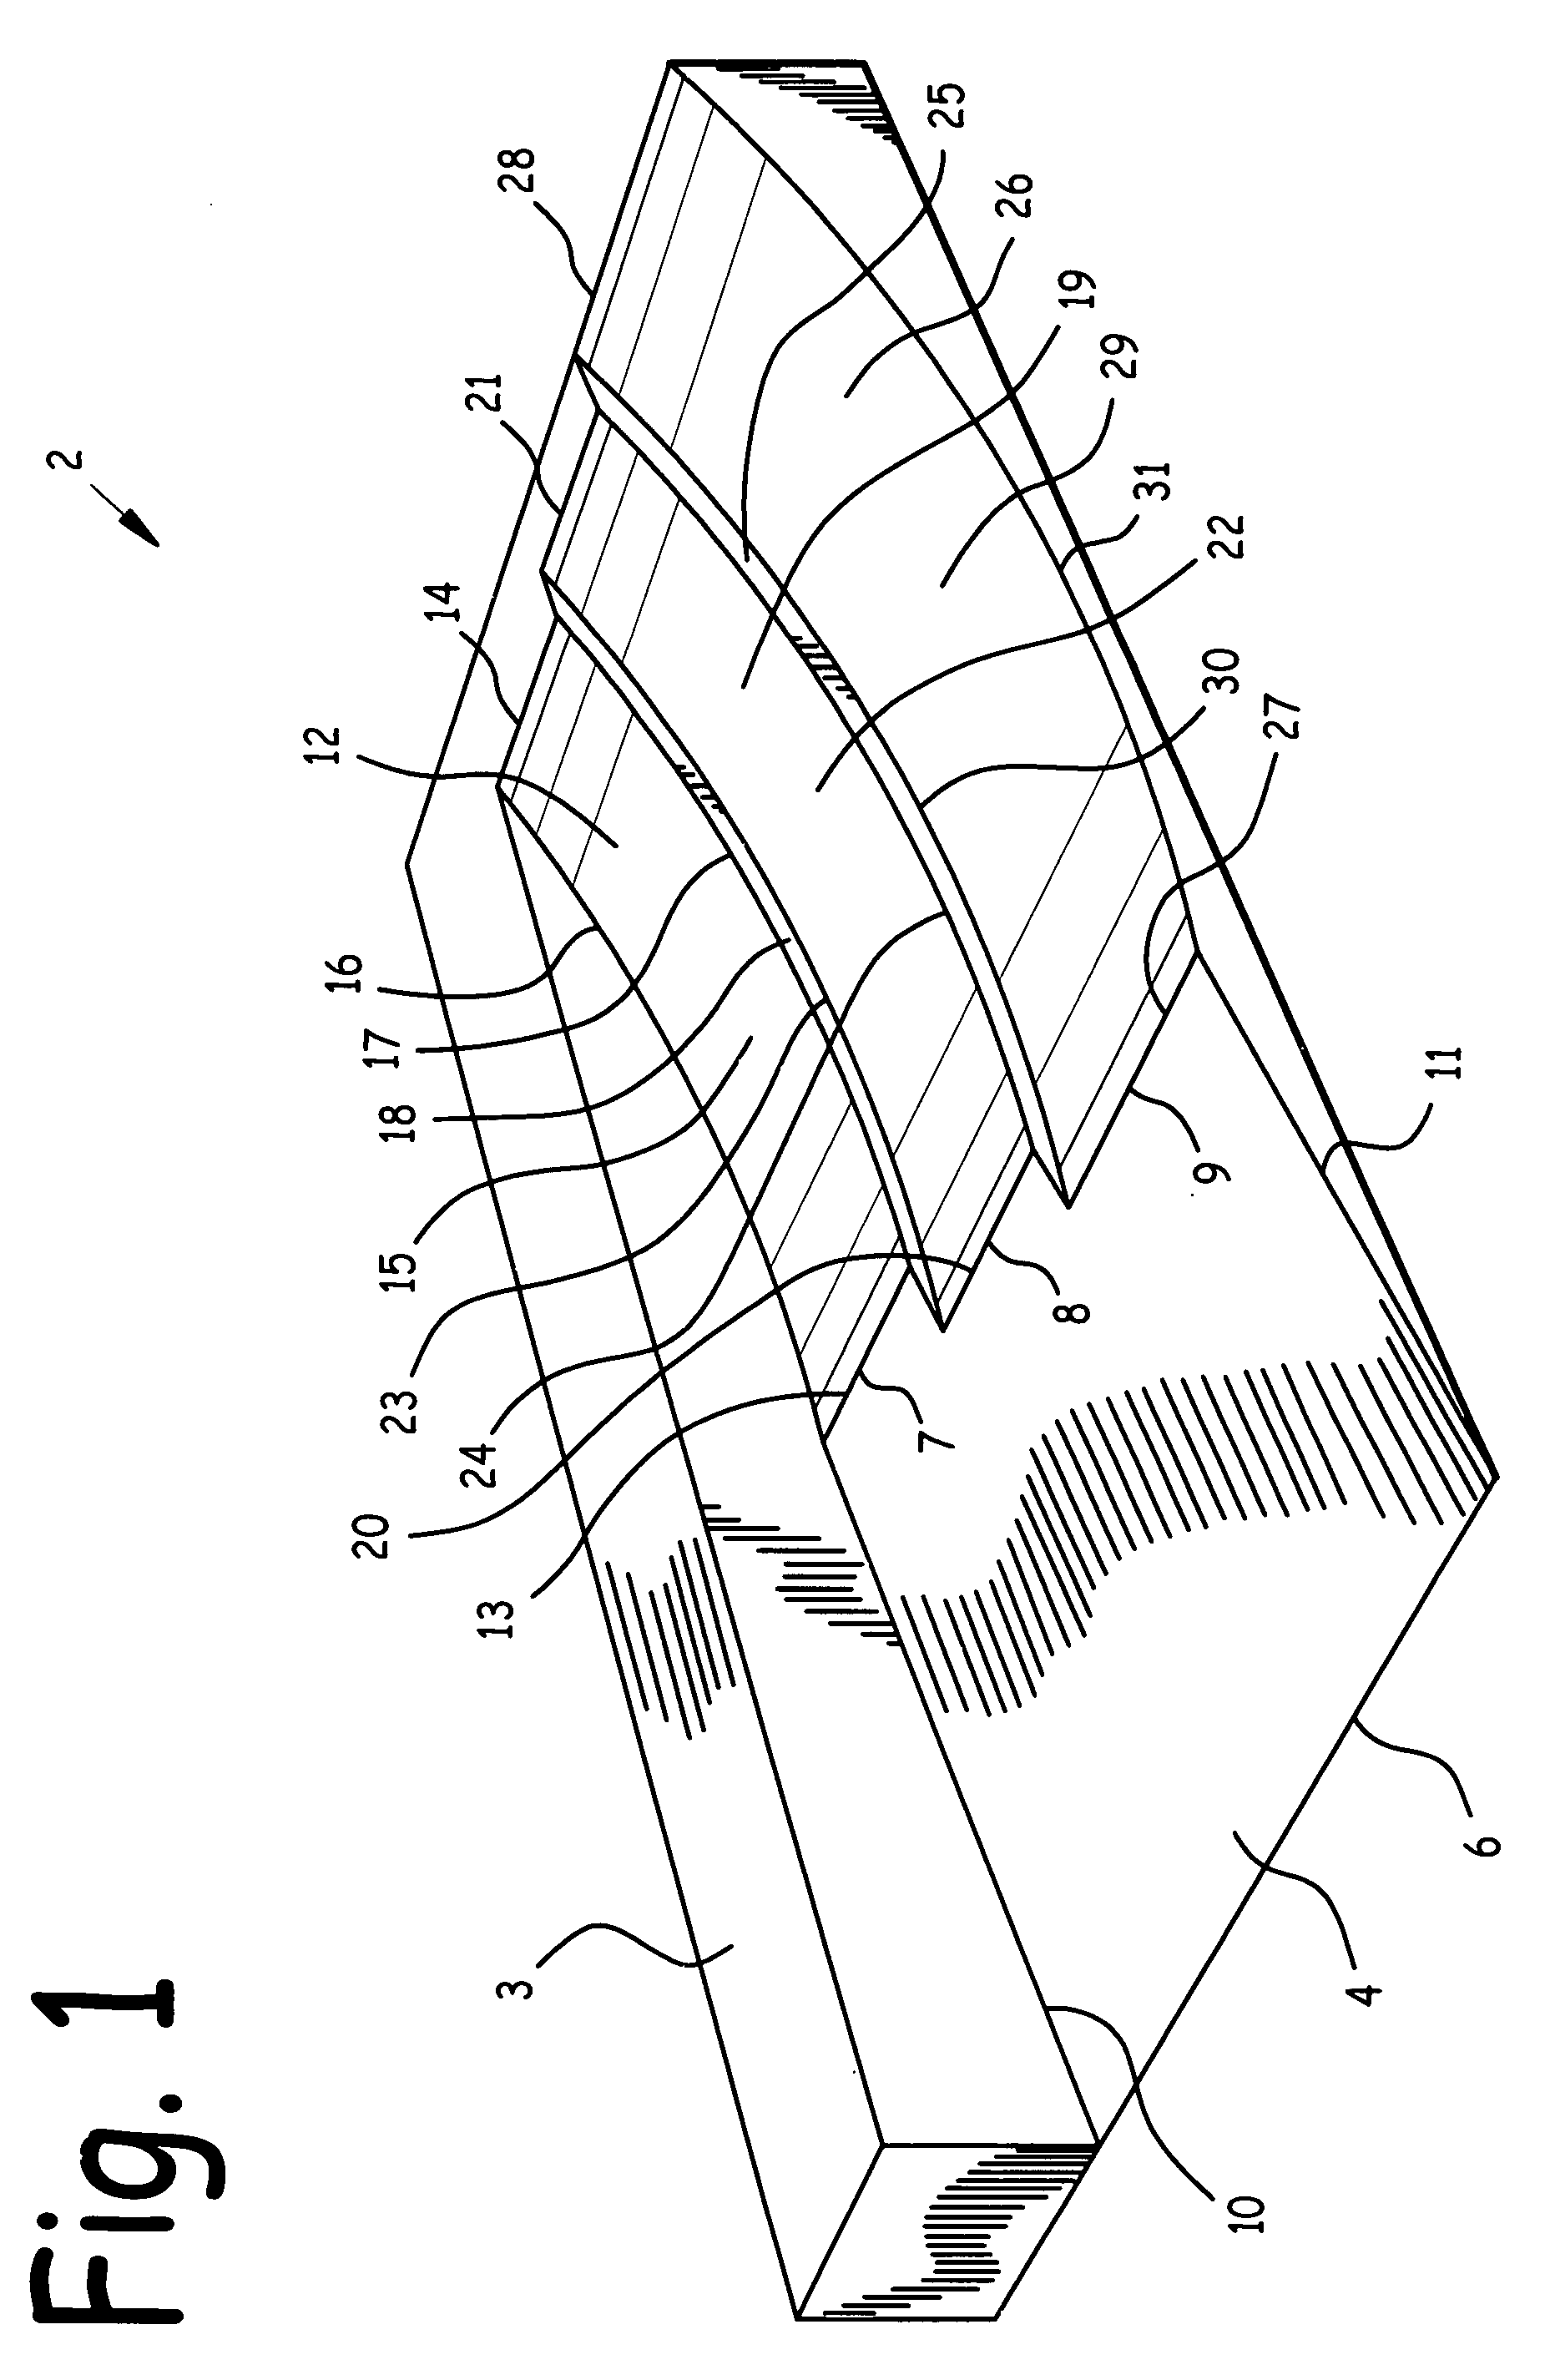 Apparatus and method for changing barbell weights